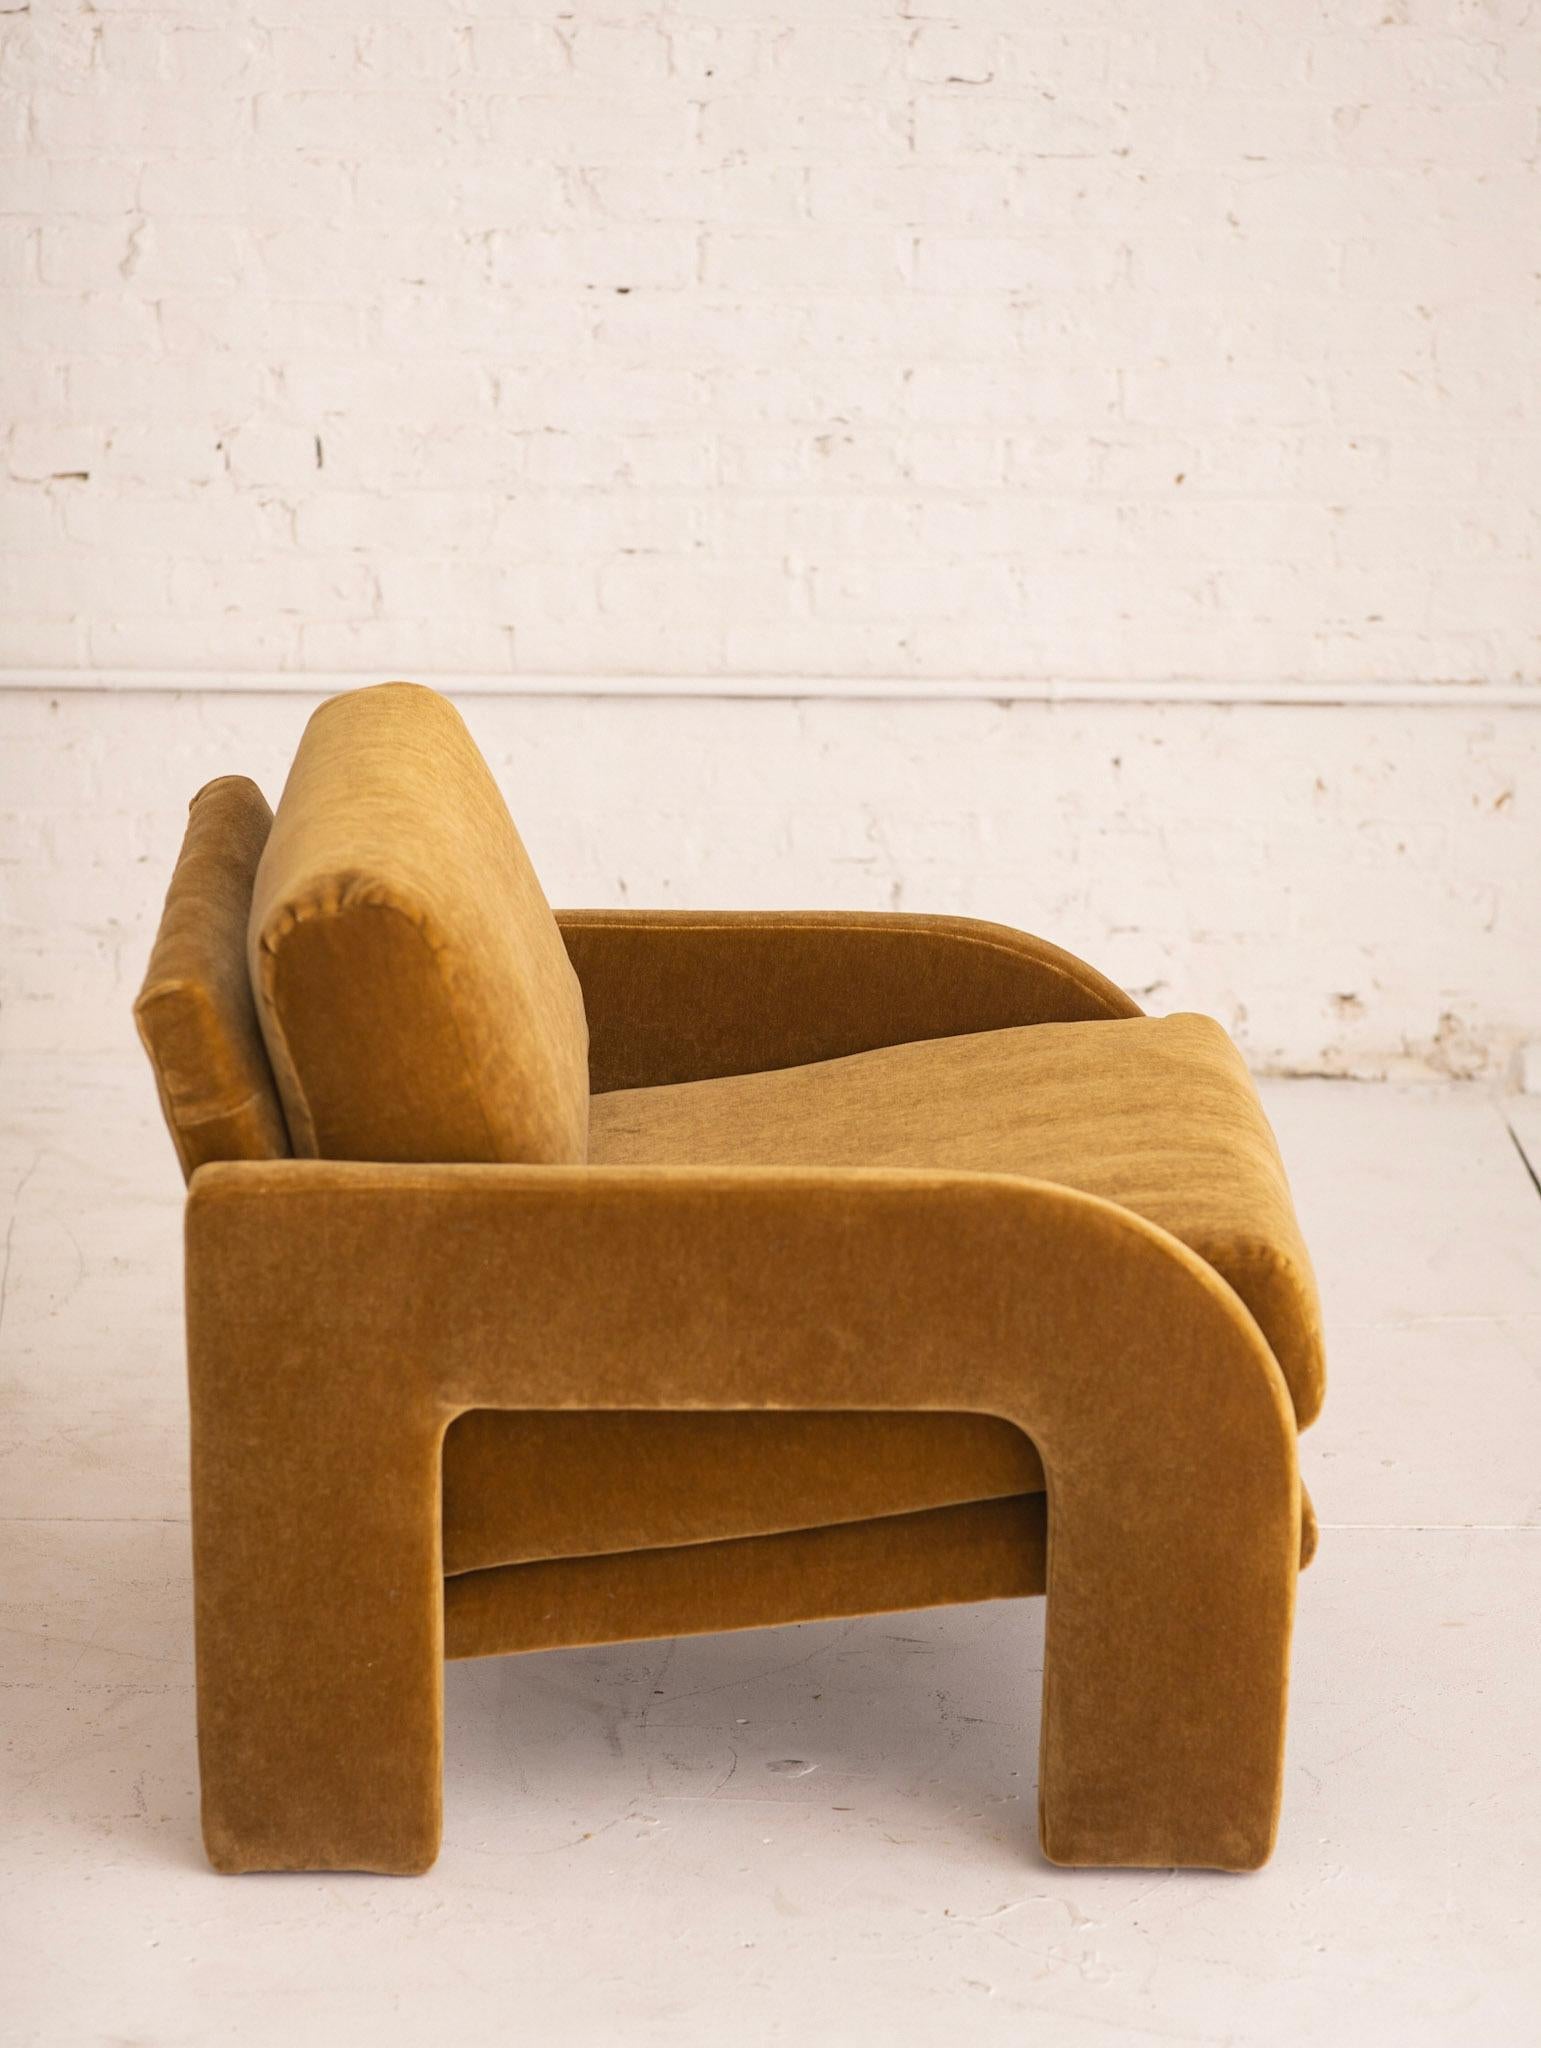 Post modern armchair with graphic architectural detail. Newly reupholstered in soft camel mohair.